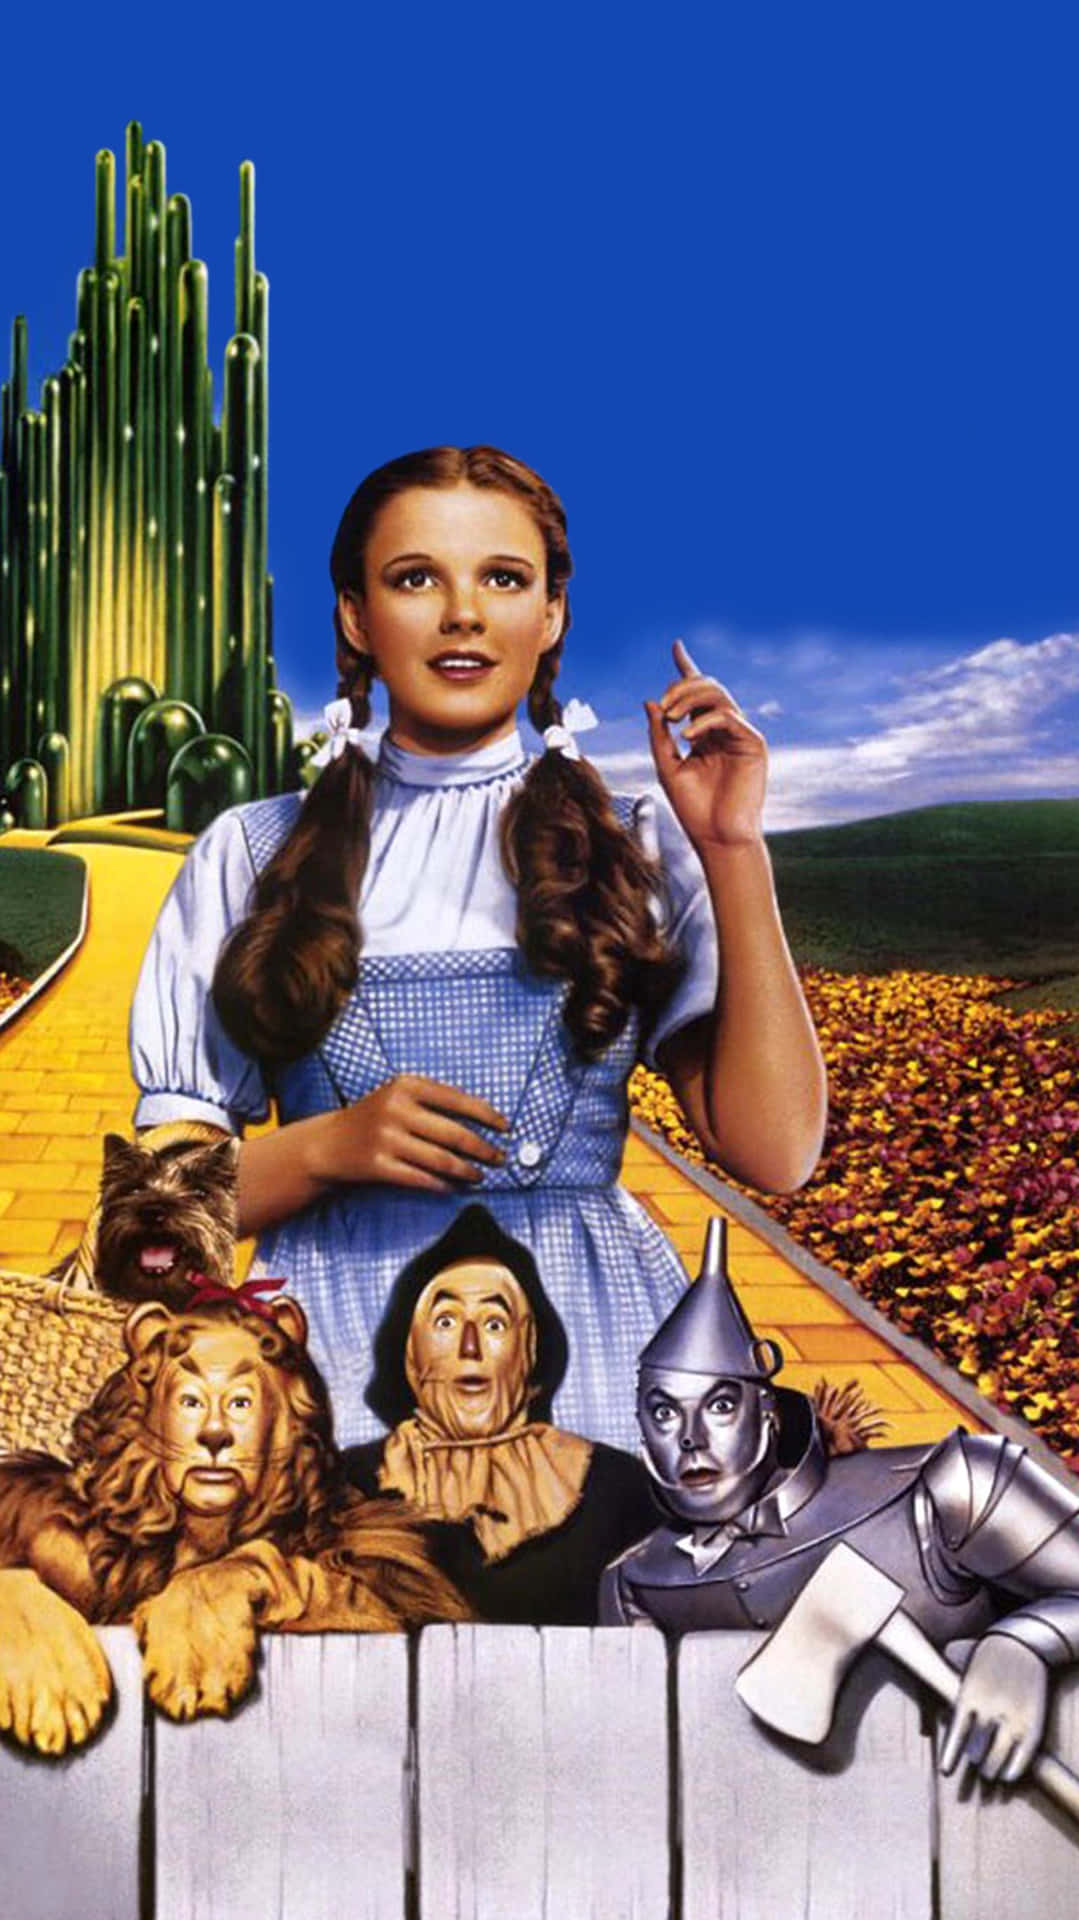 Dorothy, the Scarecrow, the Tinman and the Cowardly Lion take a journey down the Yellow Brick Road Wallpaper